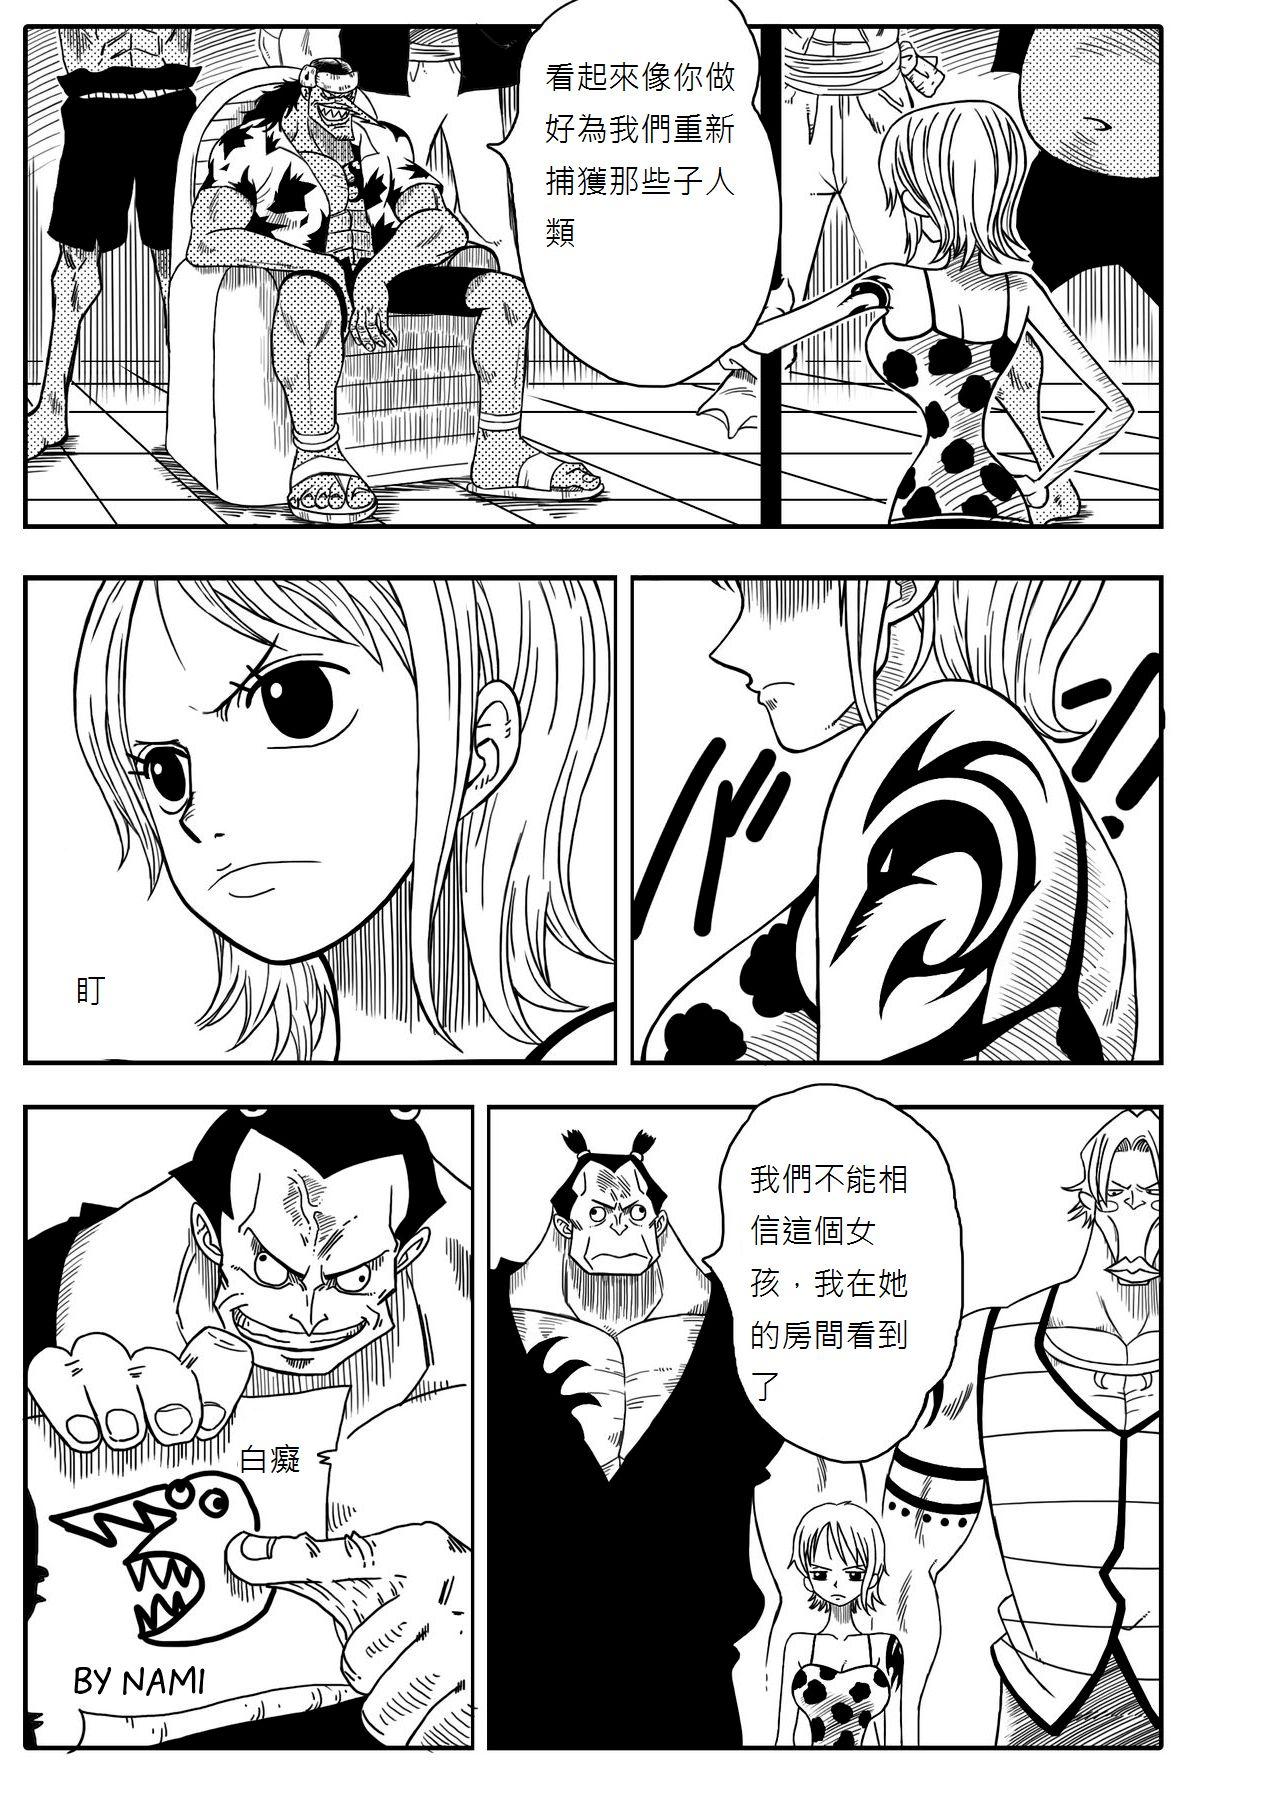 Asians Two Piece - Nami vs Arlong - One piece Girl On Girl - Page 4